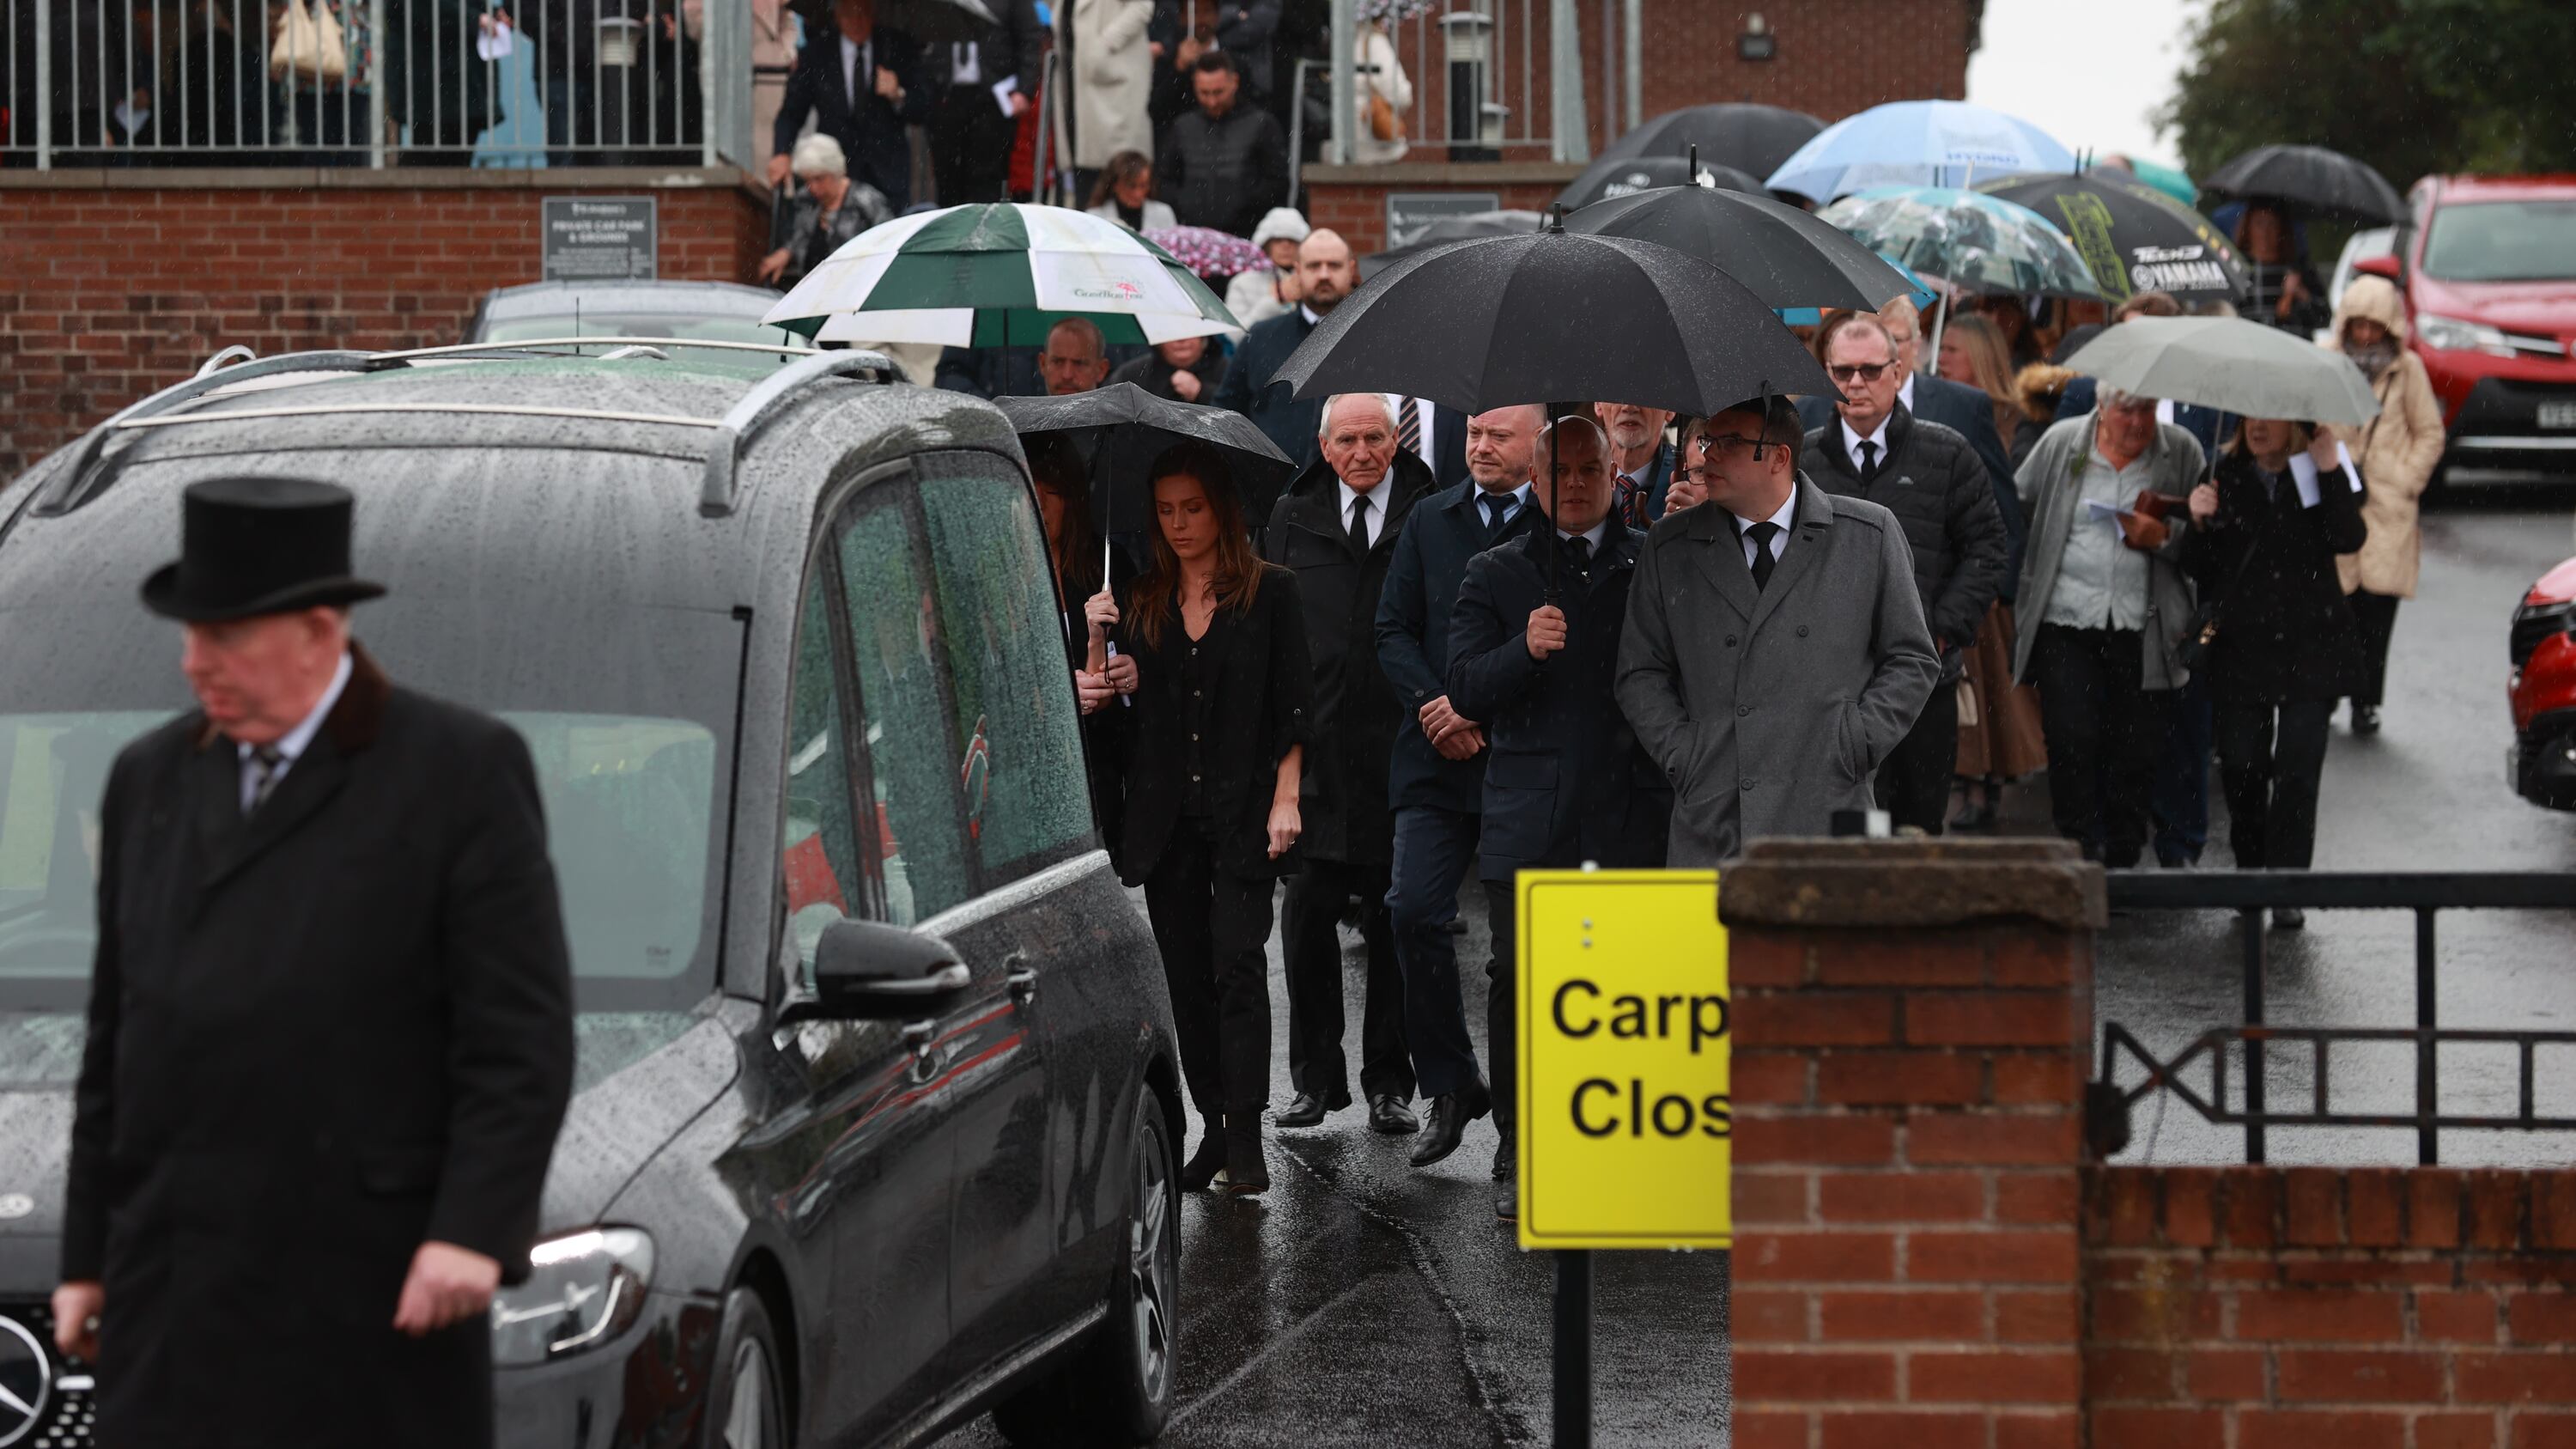 The funeral service of Patricia ‘Patsy’ Aust at St Andrew Presbyterian Church in Bangor